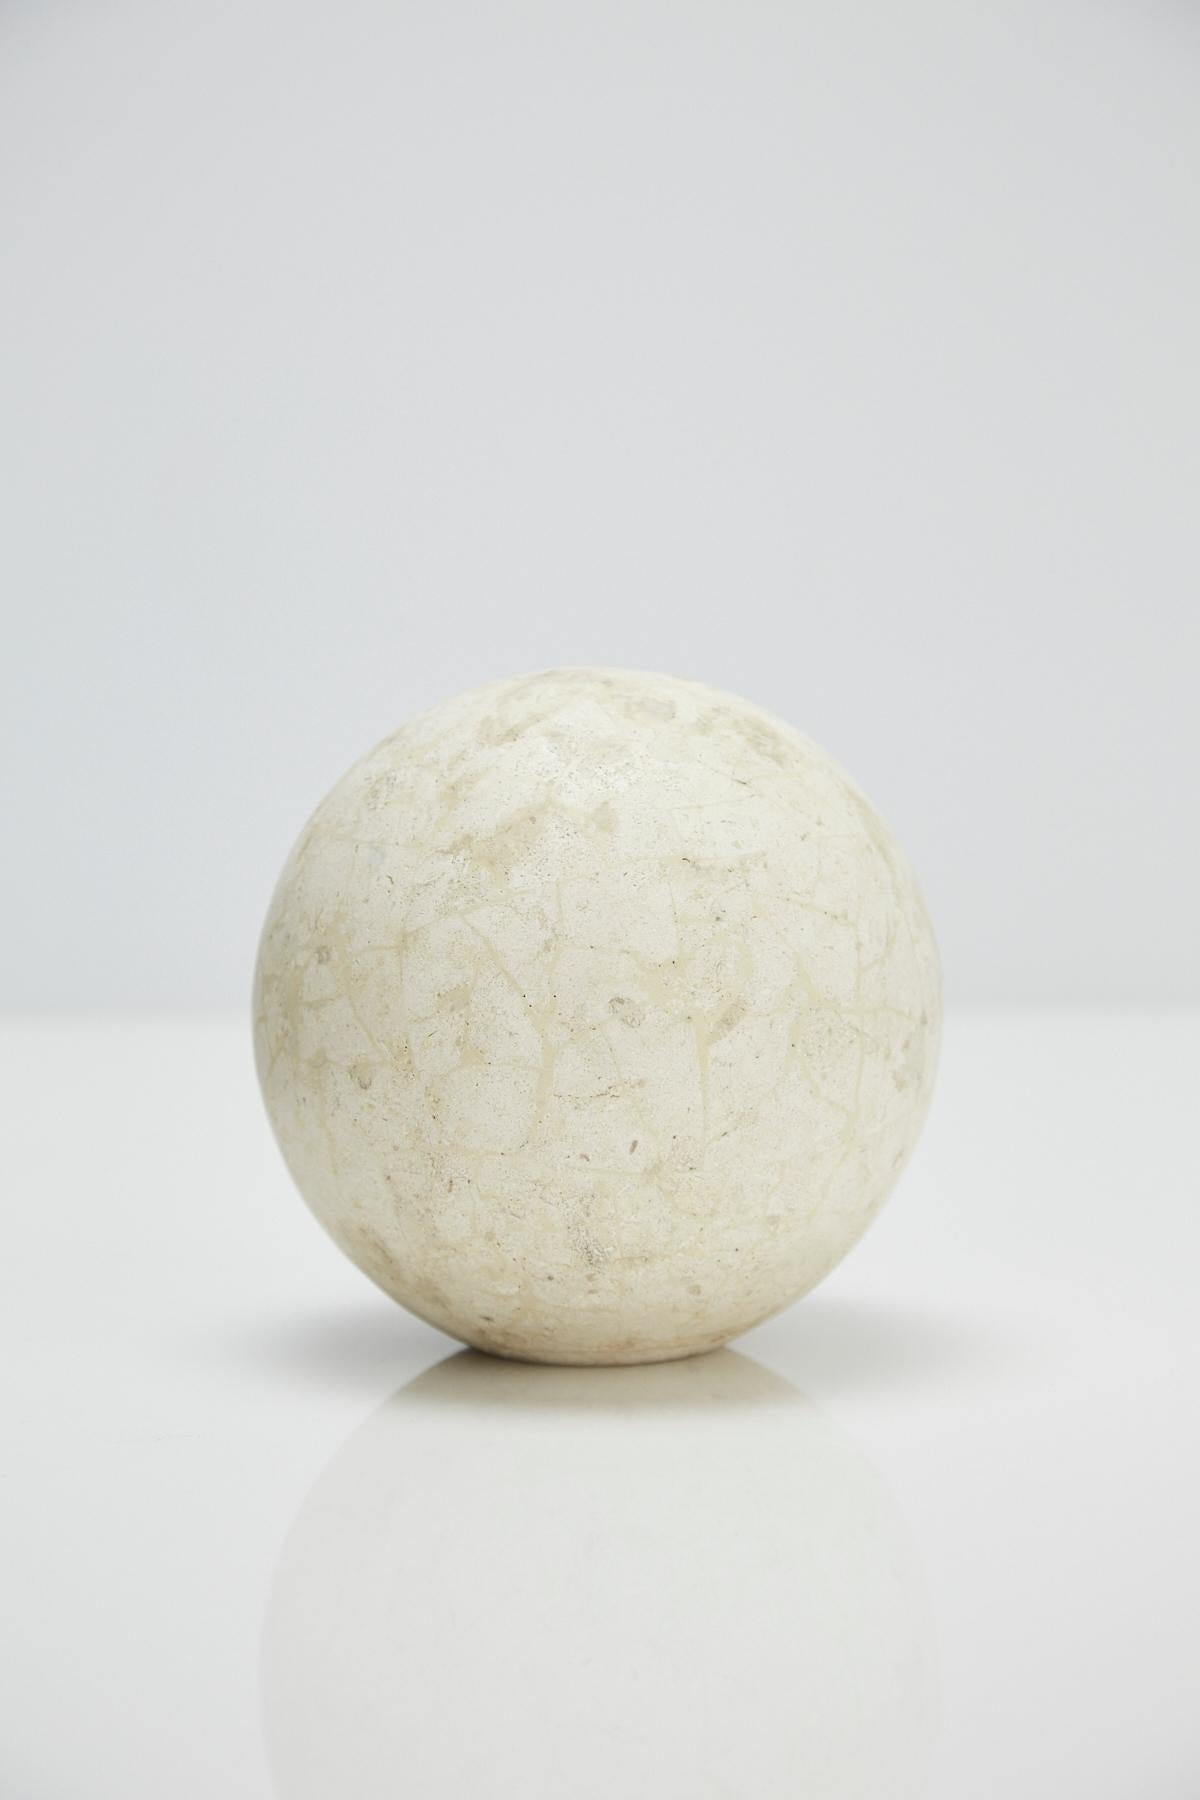 Postmodern tessellated stone sphere executed in matte Mactan stone over a fiberglass body.

Pair available. Measures: 5.5 inches diameter.

All furnishings are made from 100% natural Fossil Stone or Seashell inlay, carefully hand cut and crafted